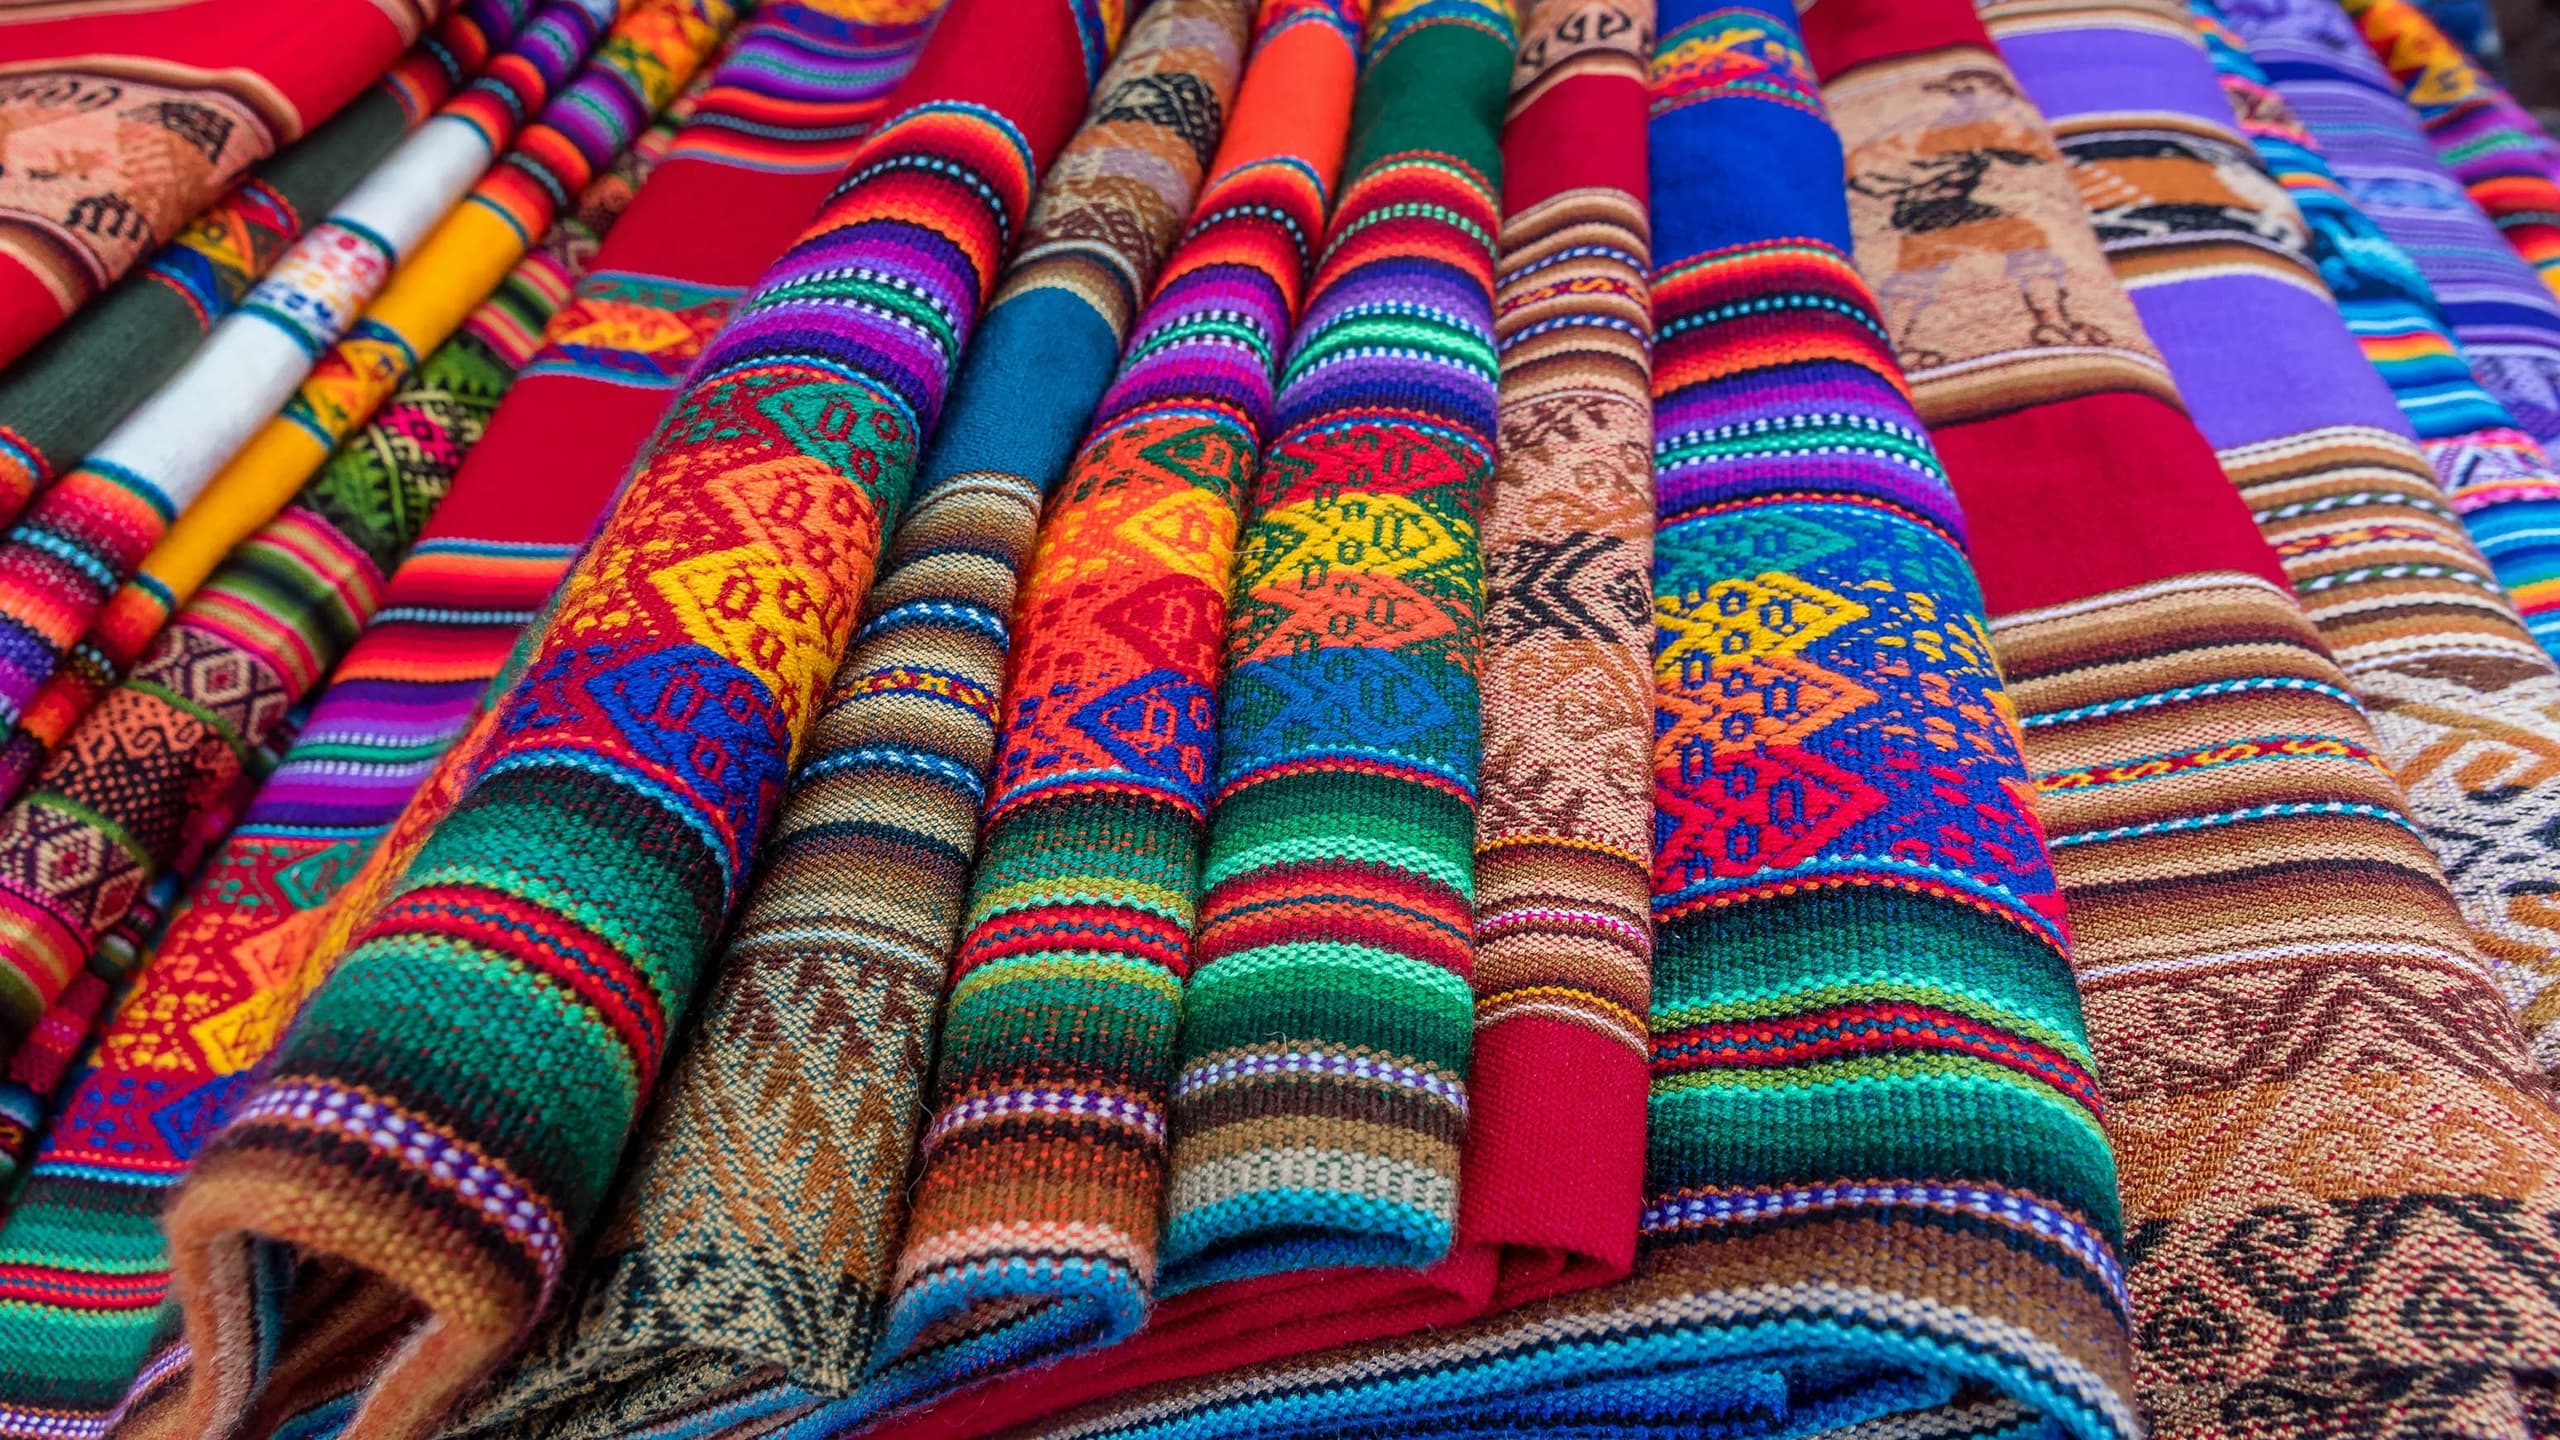 Peruvian woven carpets, common in the towns frequented on the Machu Picchu hiking trails.